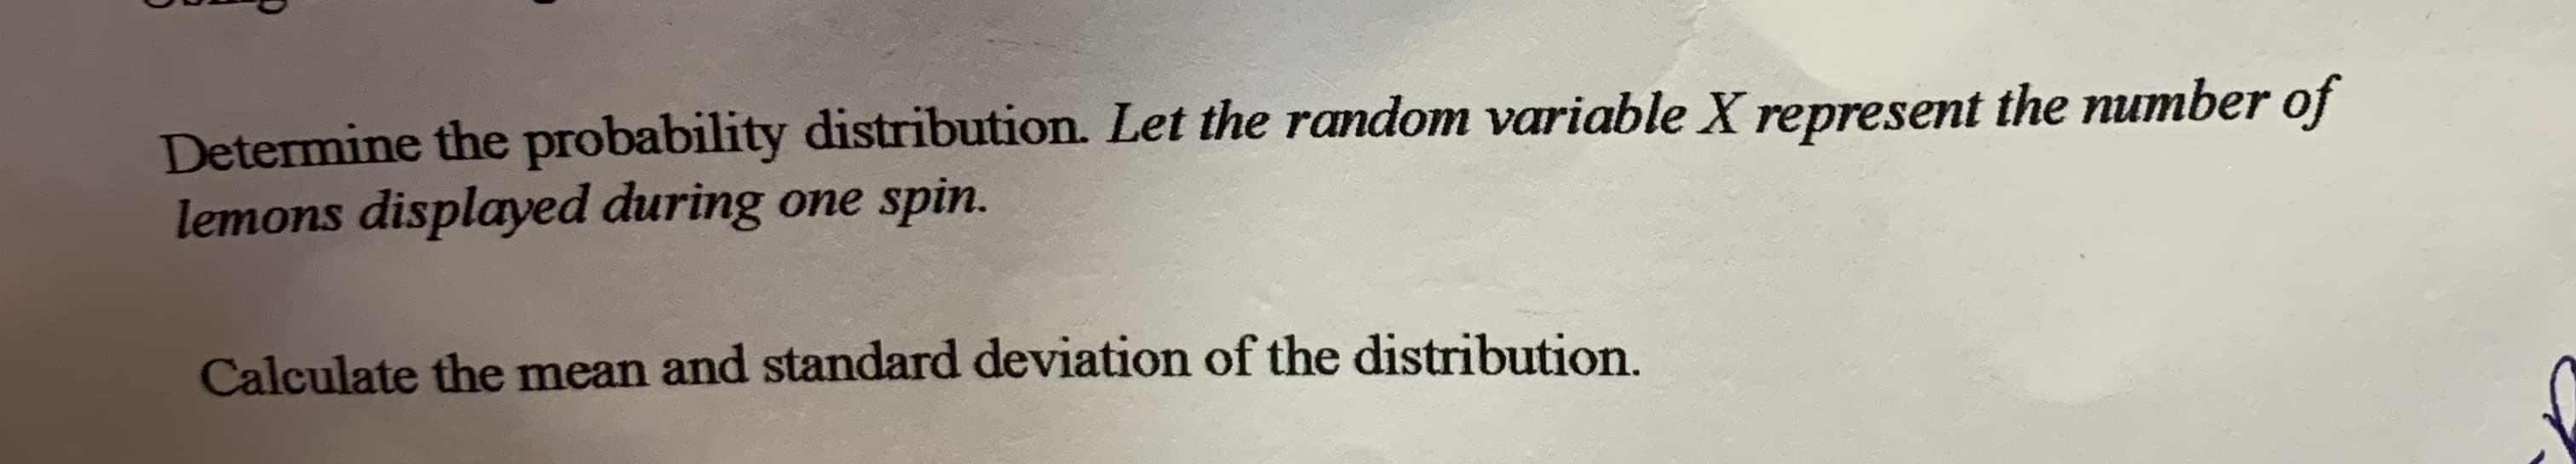 Determine the probability distribution. Let the random variable X represent the number of
lemons displayed during one spin.
Calculate the mean and standard deviation of the distribution.
